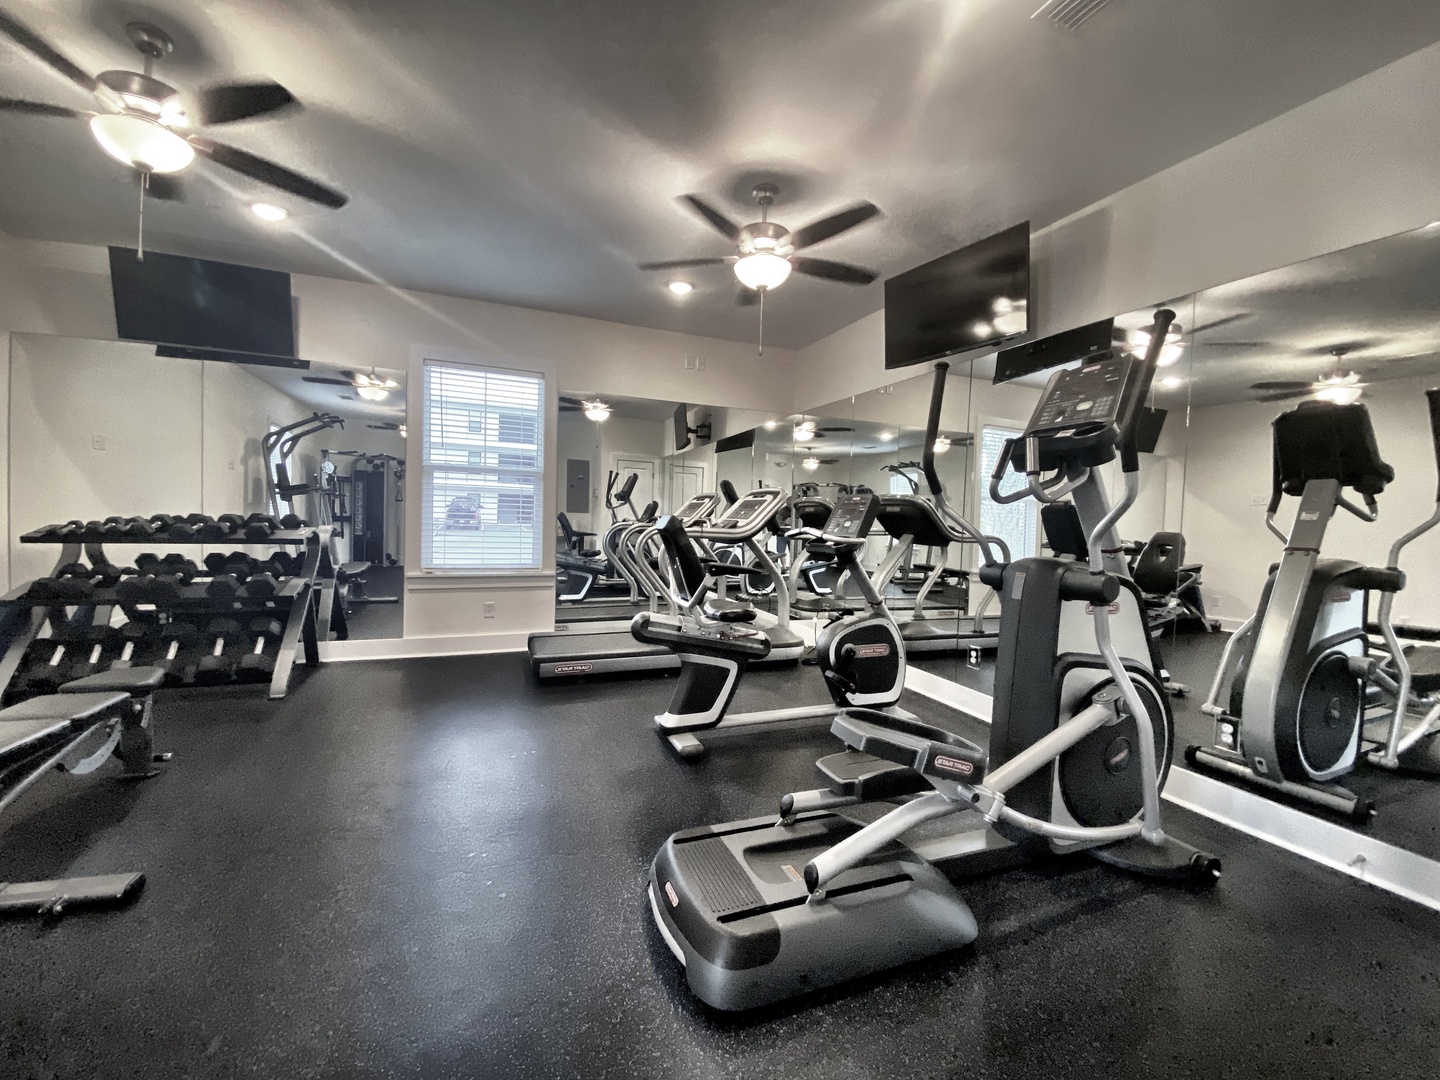 Grab a workout in the fitness center!